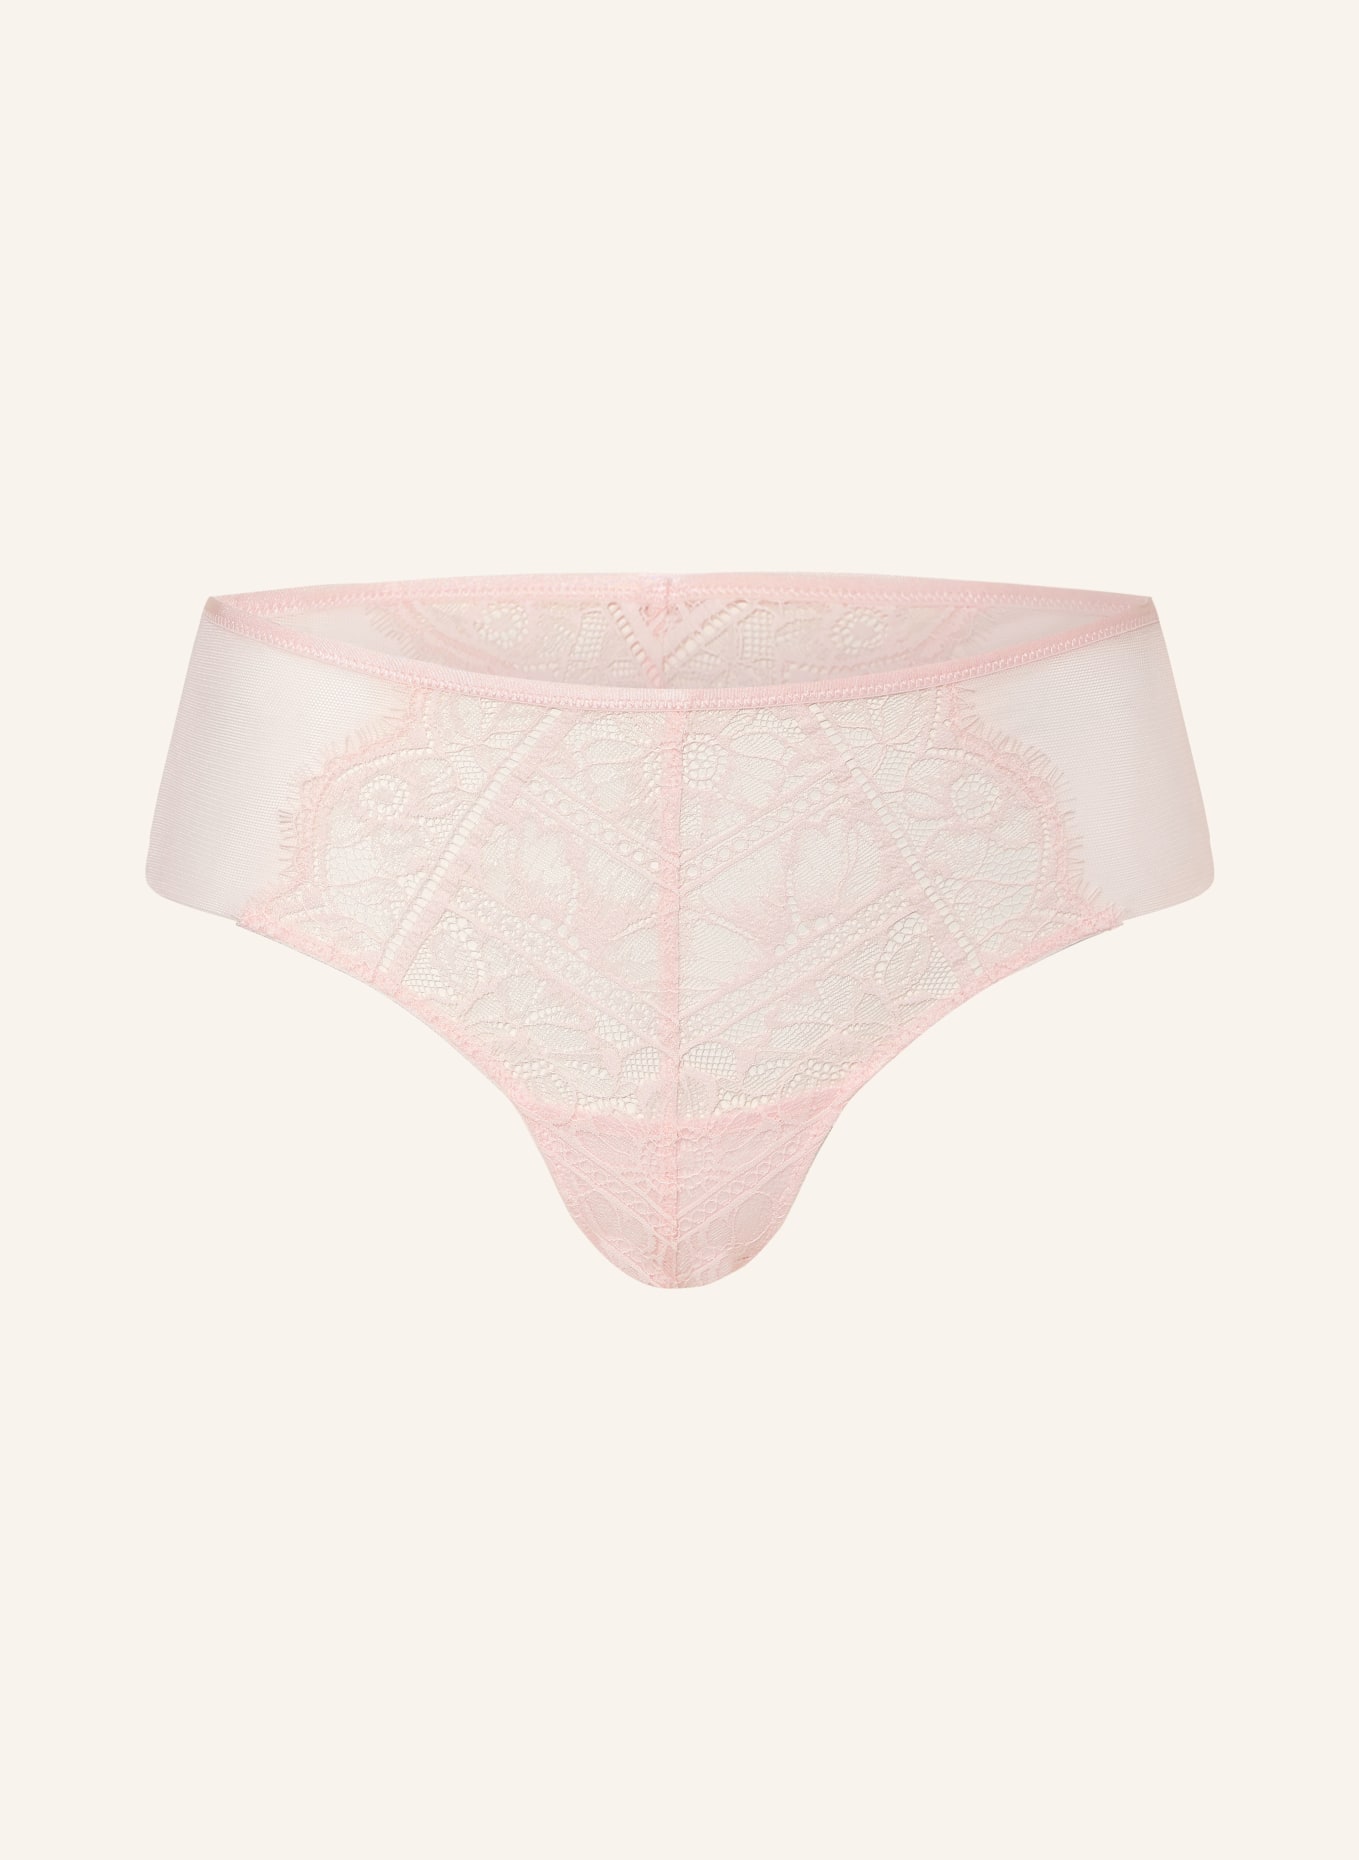 mey Panty series MAGNIFICENT, Color: LIGHT PINK (Image 1)